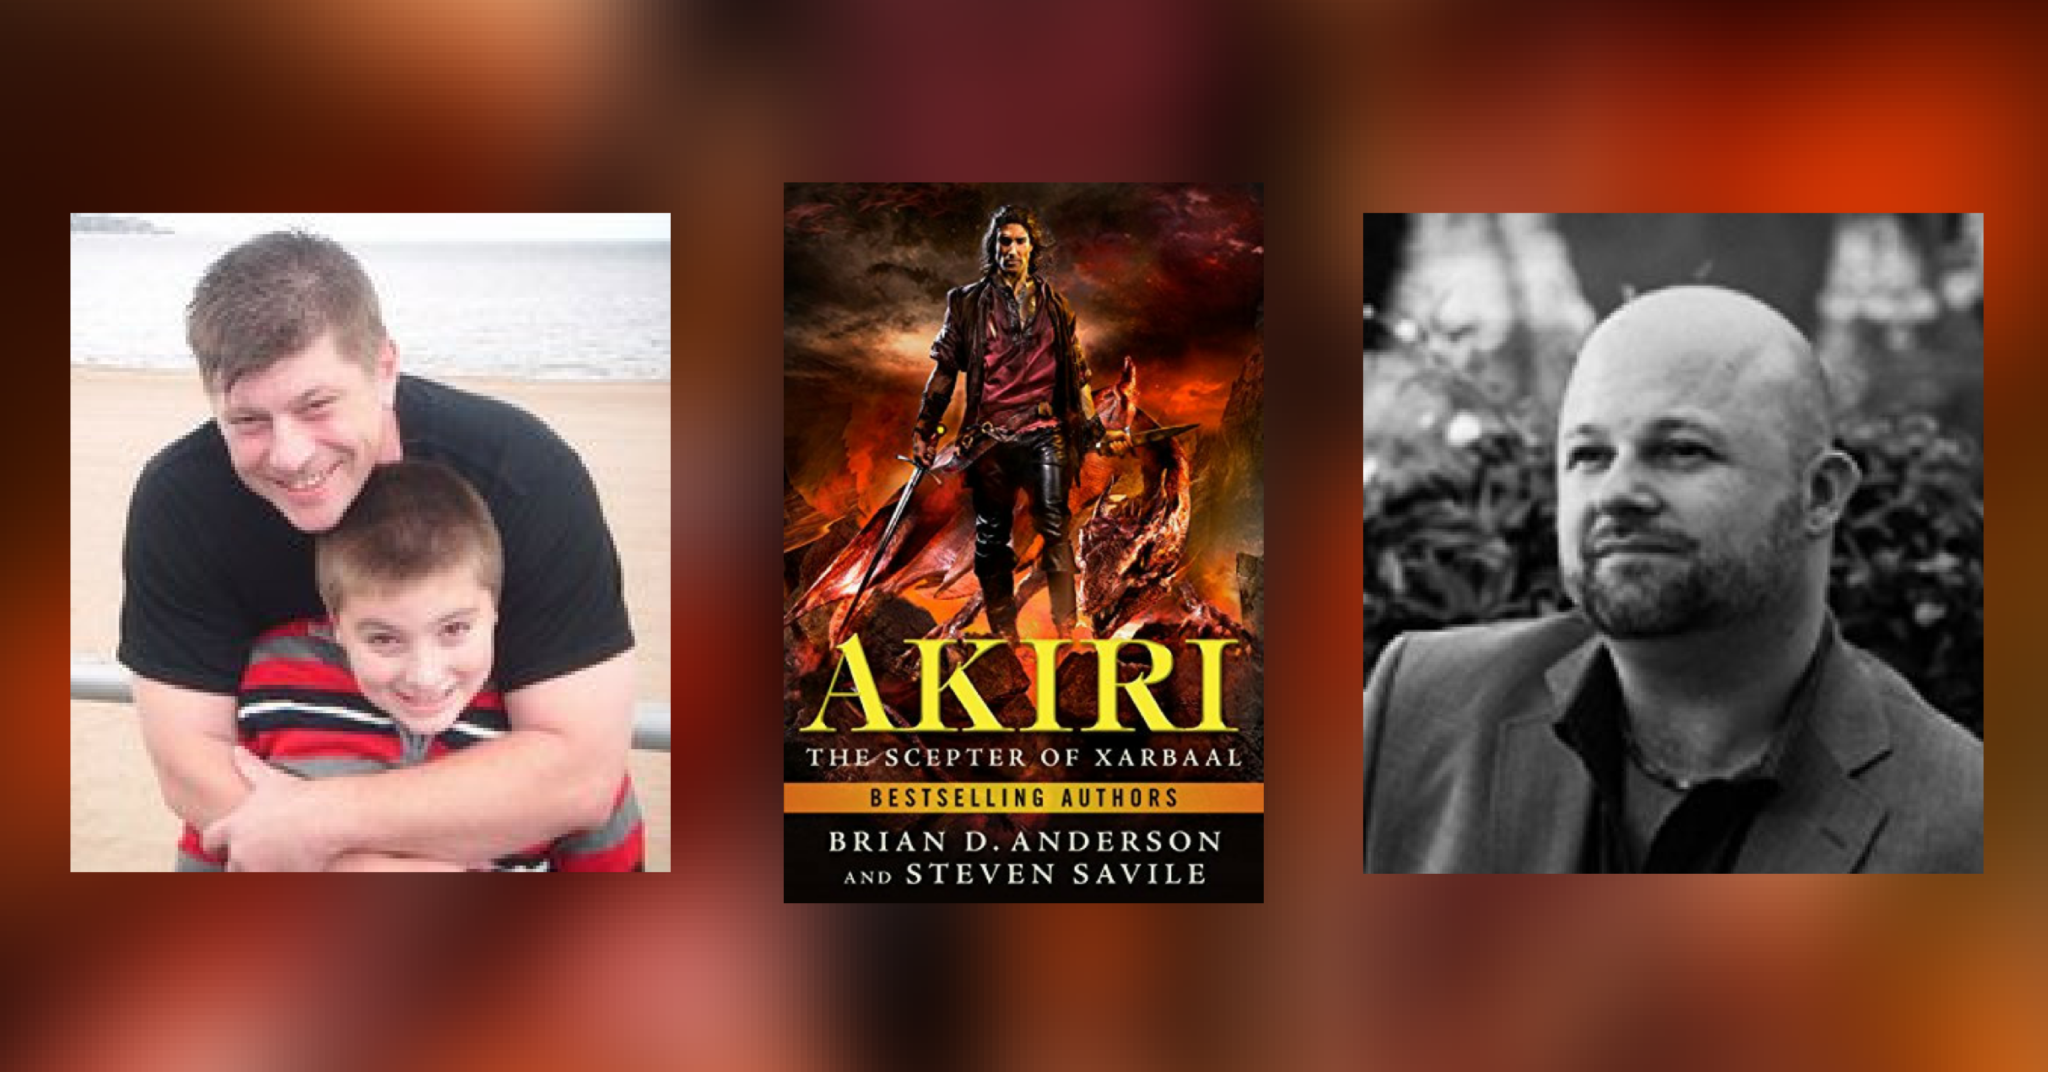 Interview with Brian D. Anderson and Steven Savile, authors of Akiri: The Sceptor of Xarbaal